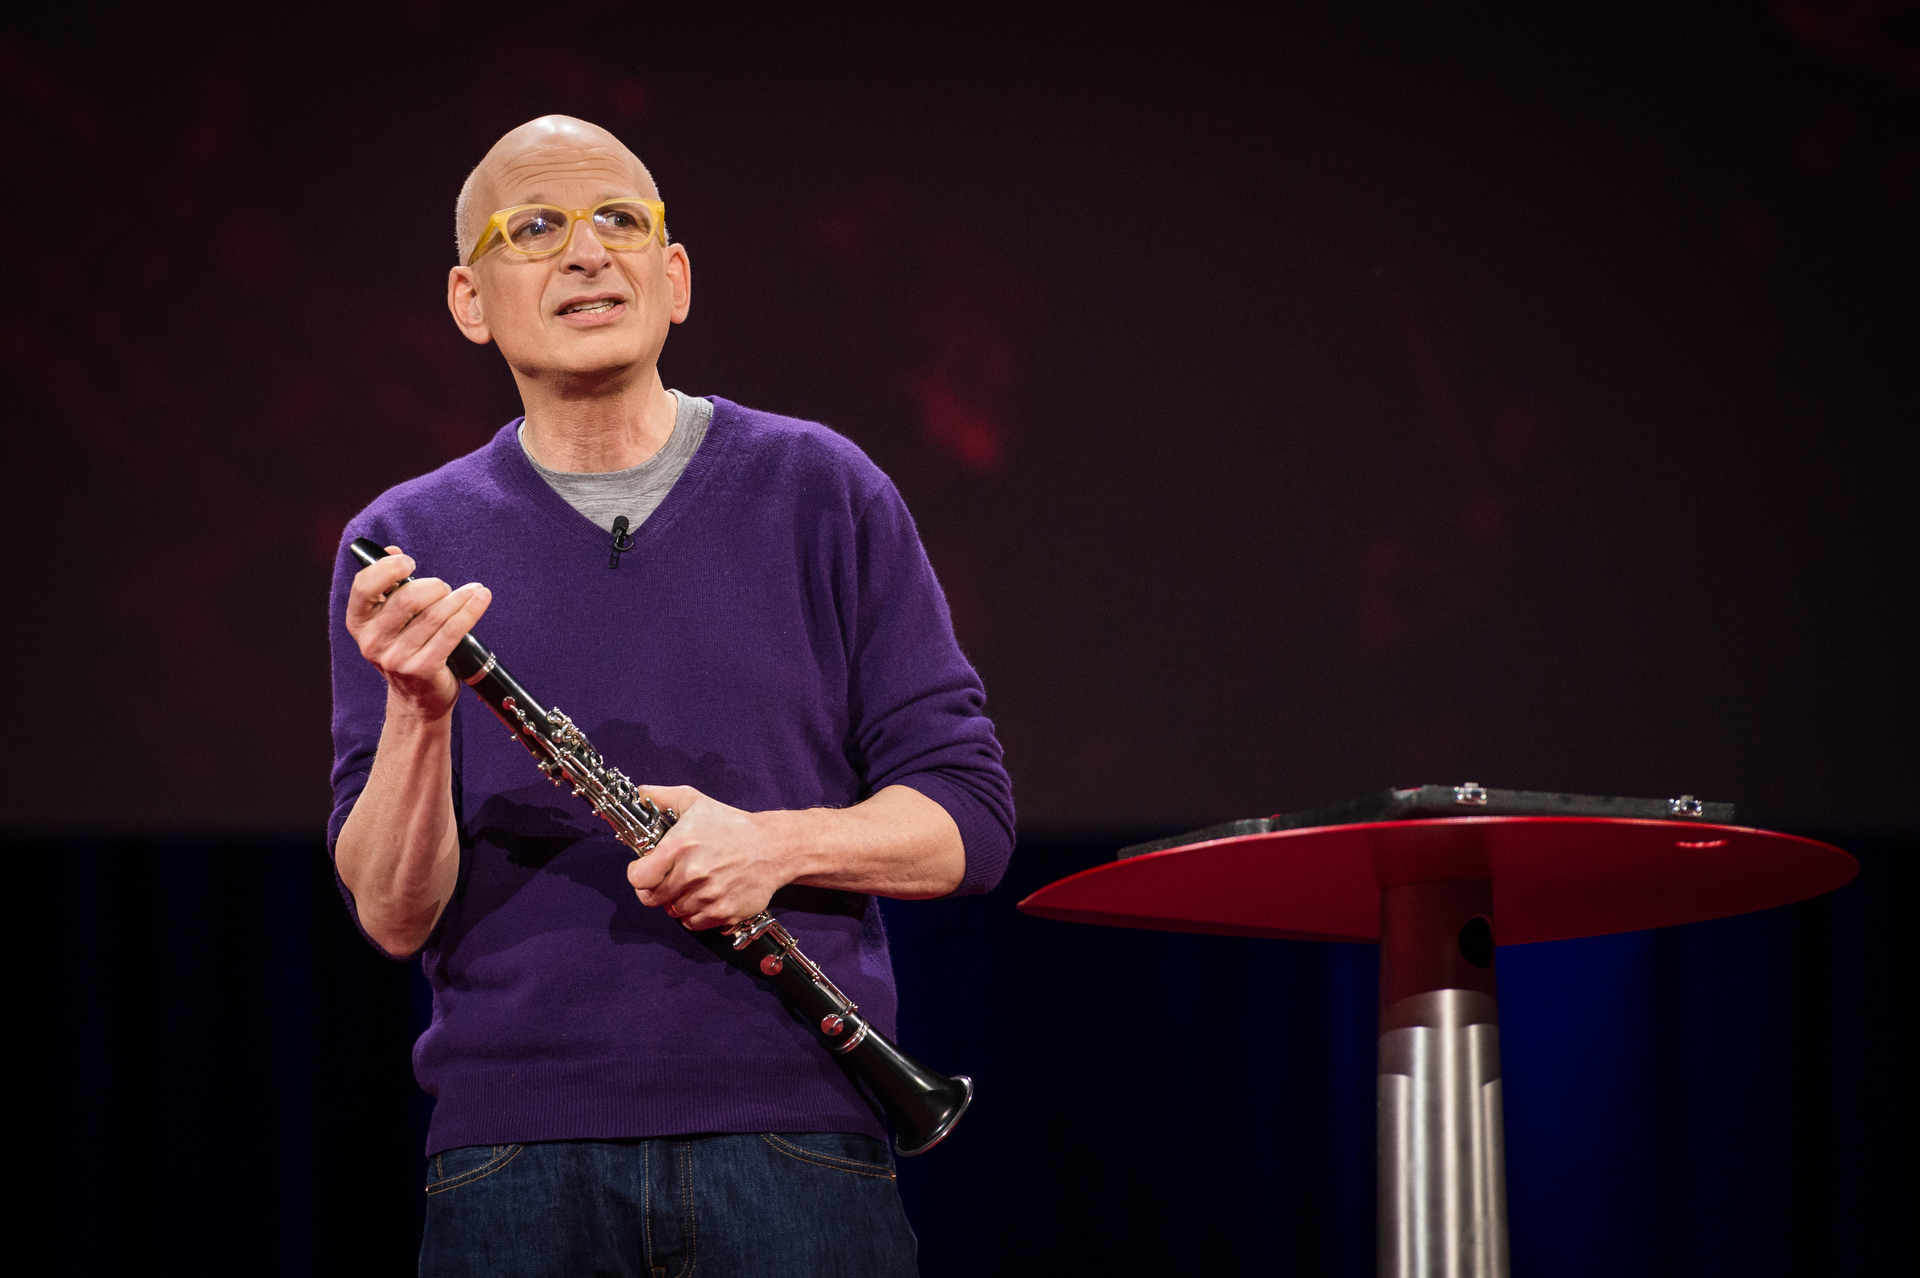 Everything I’ve learned I learned from clarinet practice: Seth Godin
at TED2014